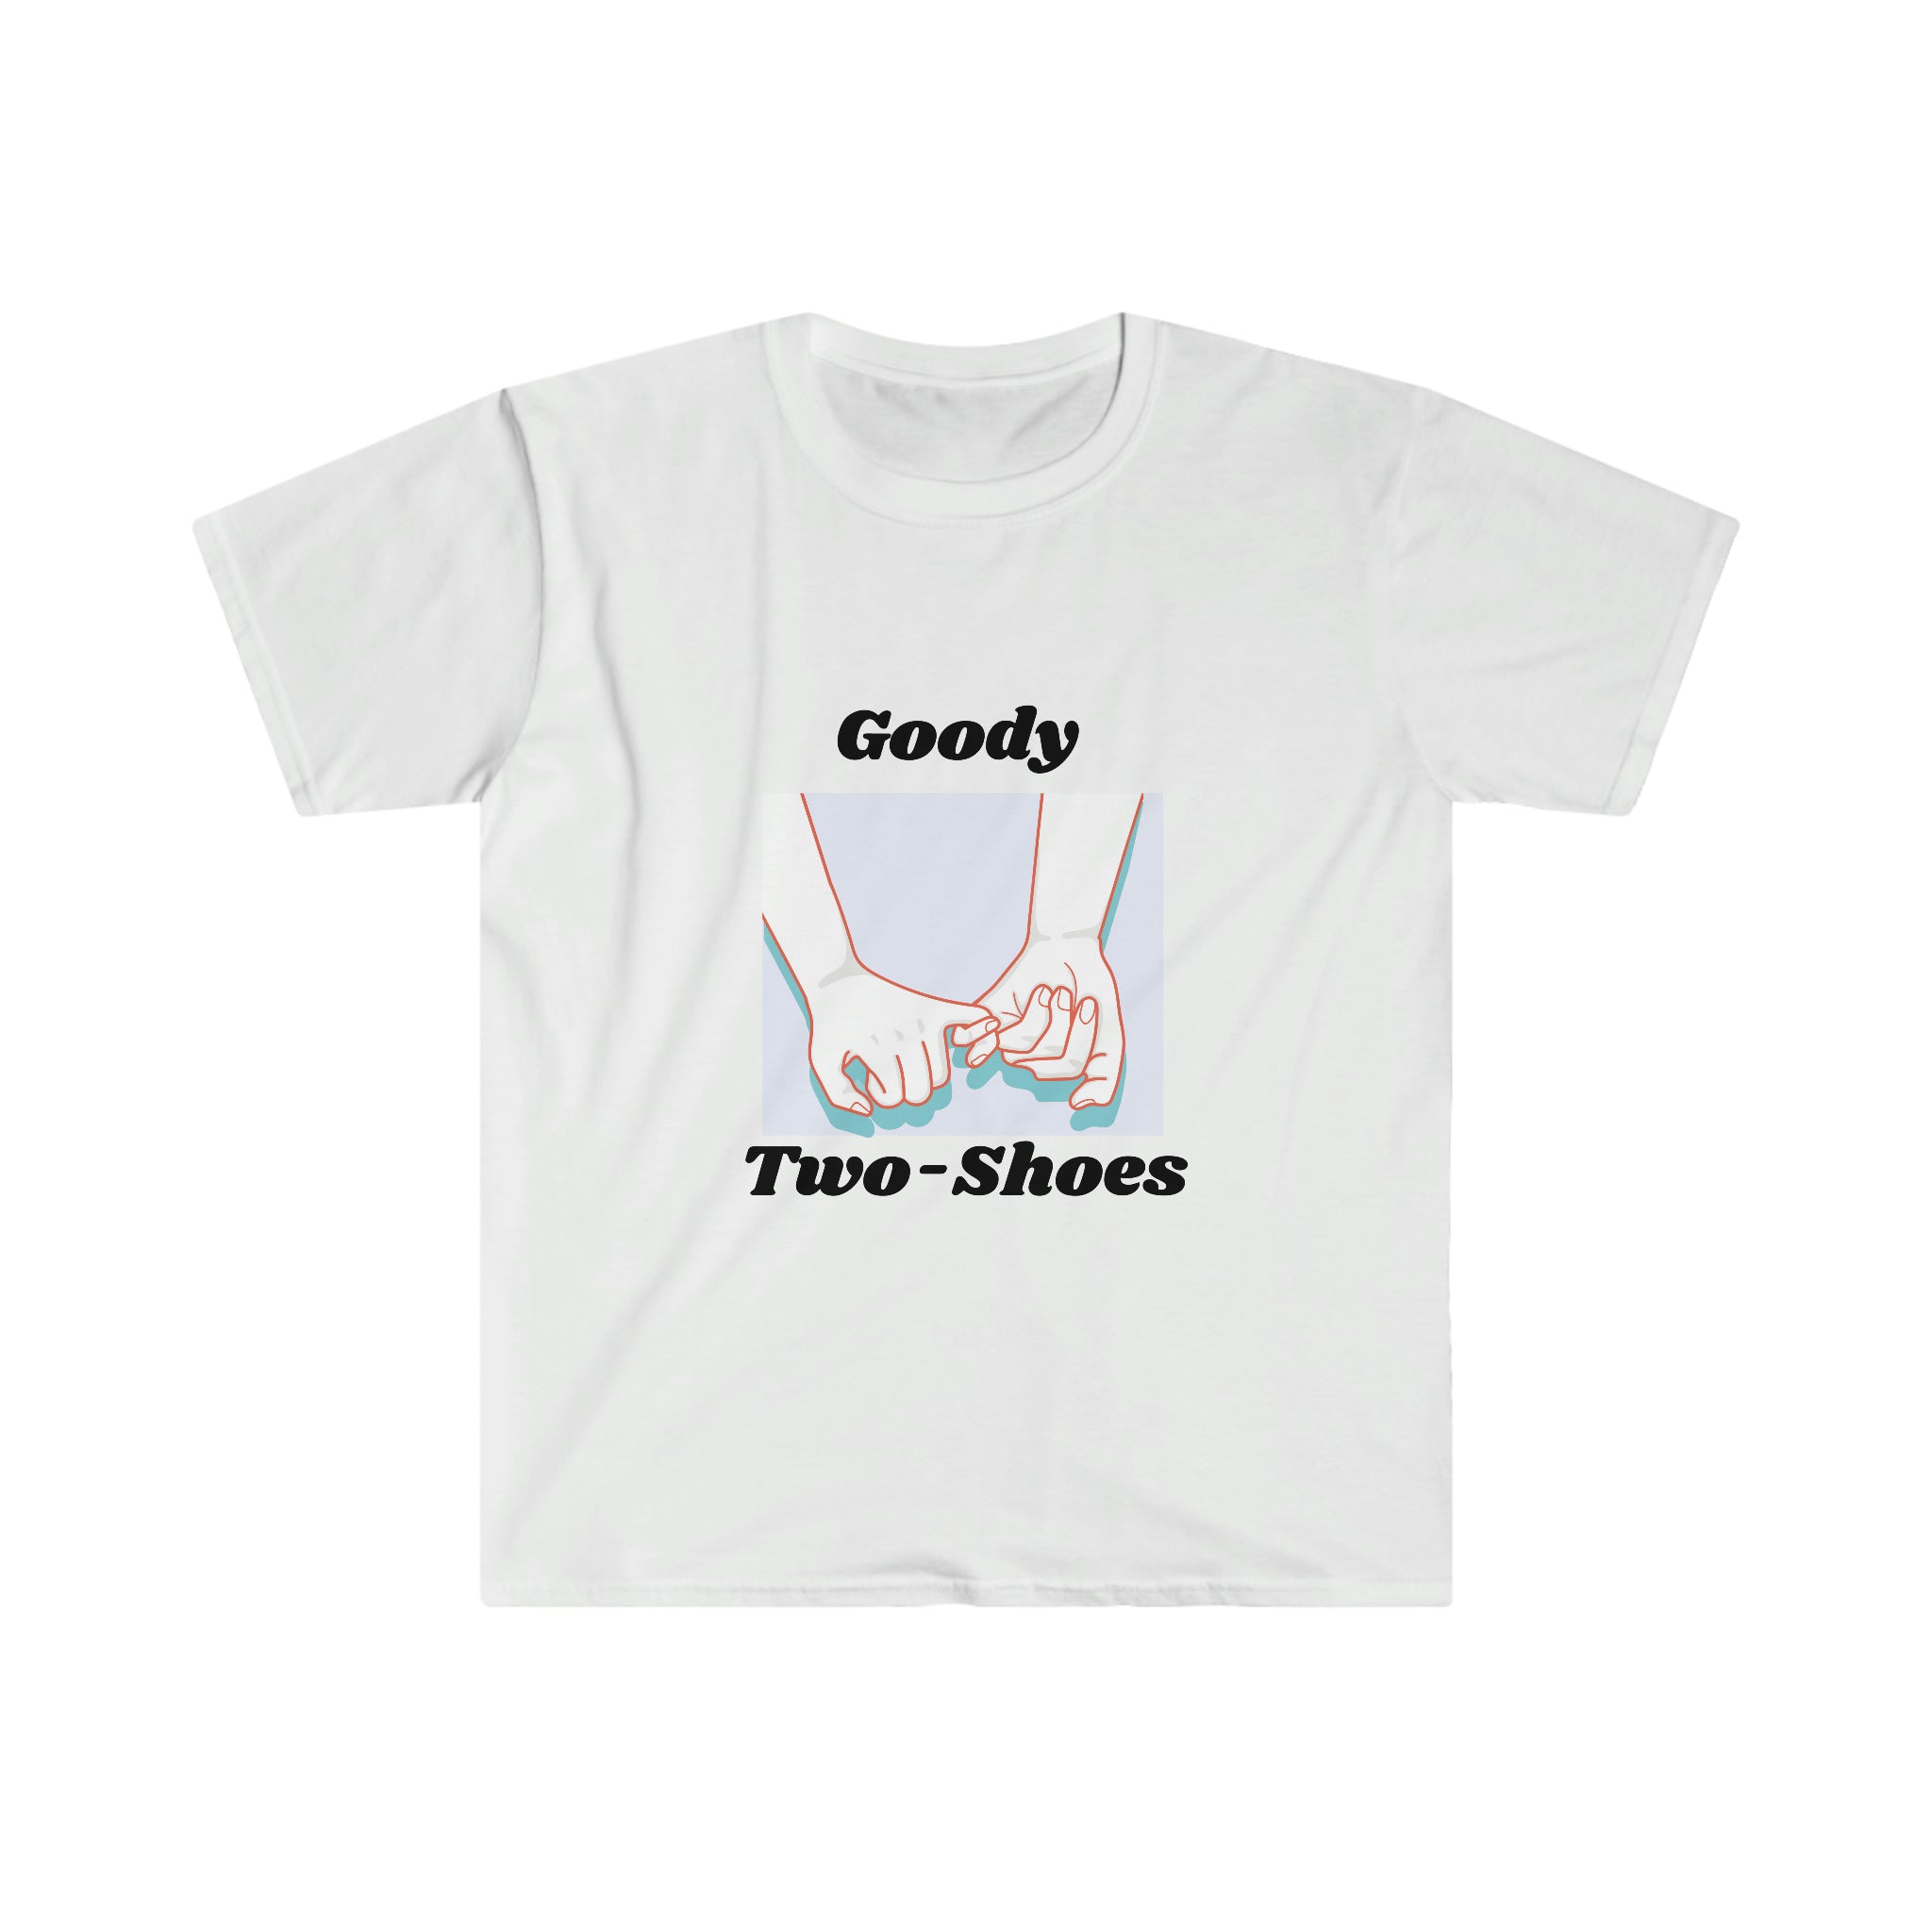 A bold white Goody Two Shoes T-Shirt featuring a picture of hands and words.